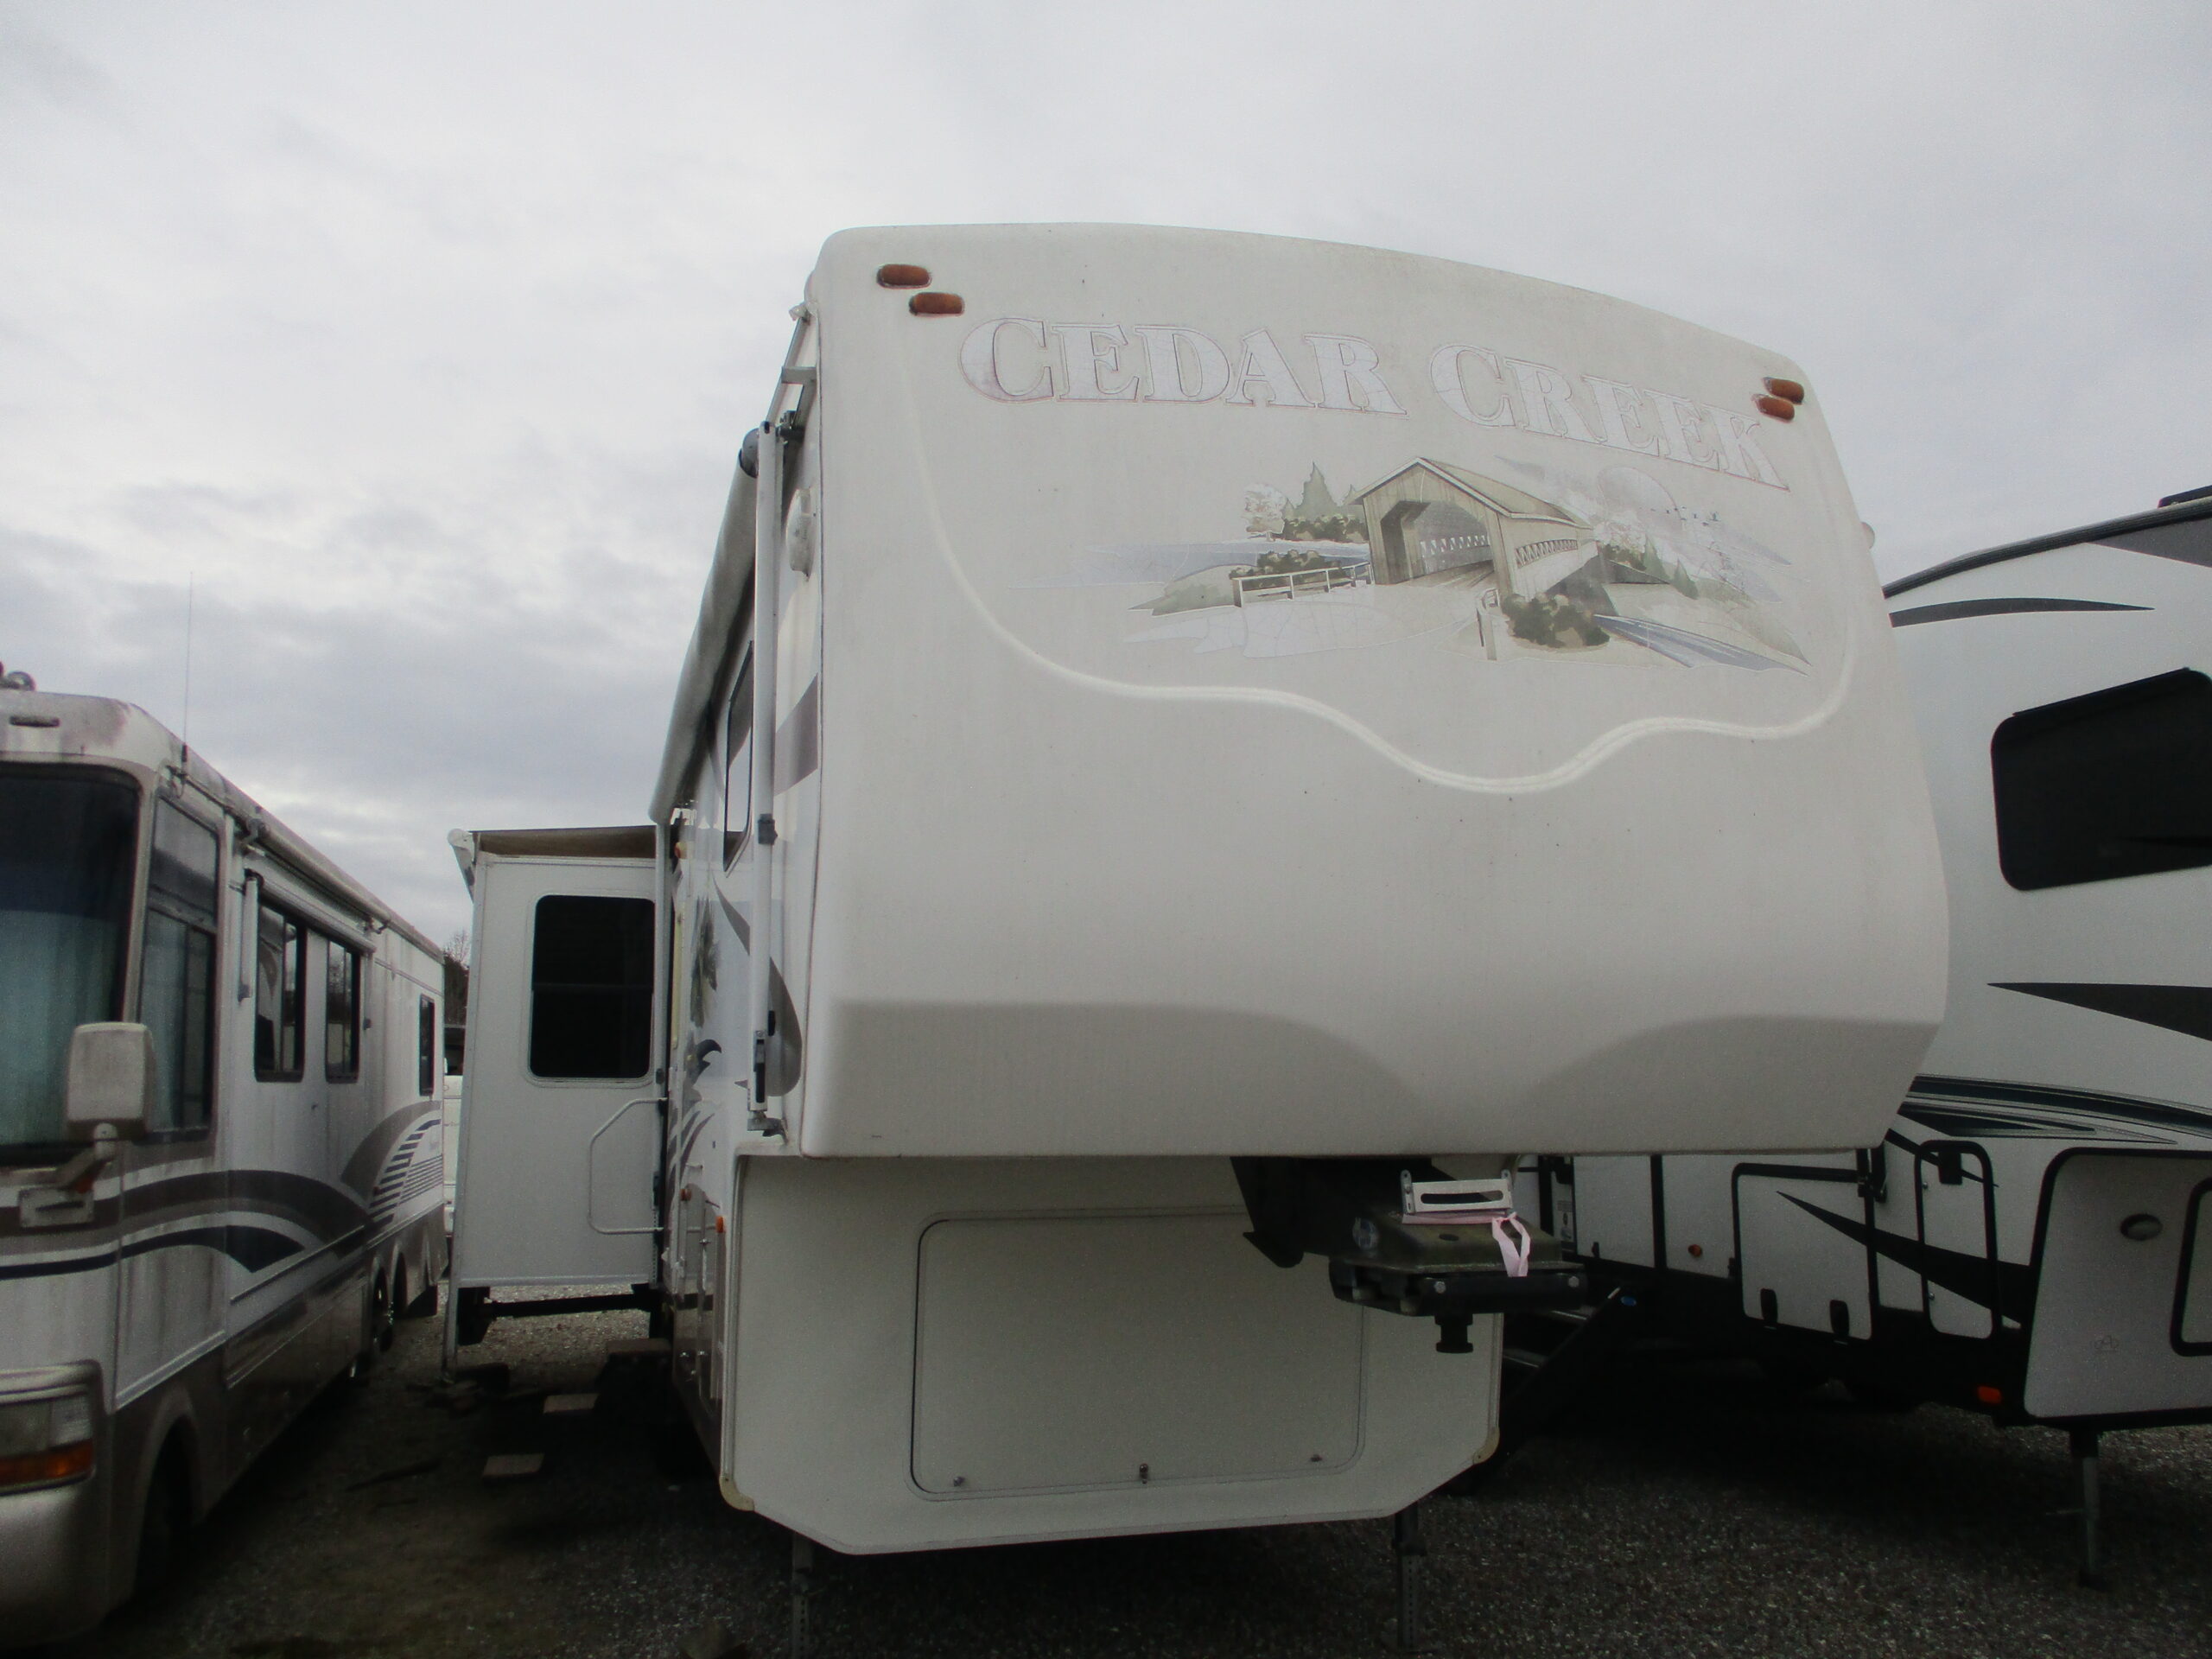 Camper Dealer of RVs within driving distance of Boone, NC.